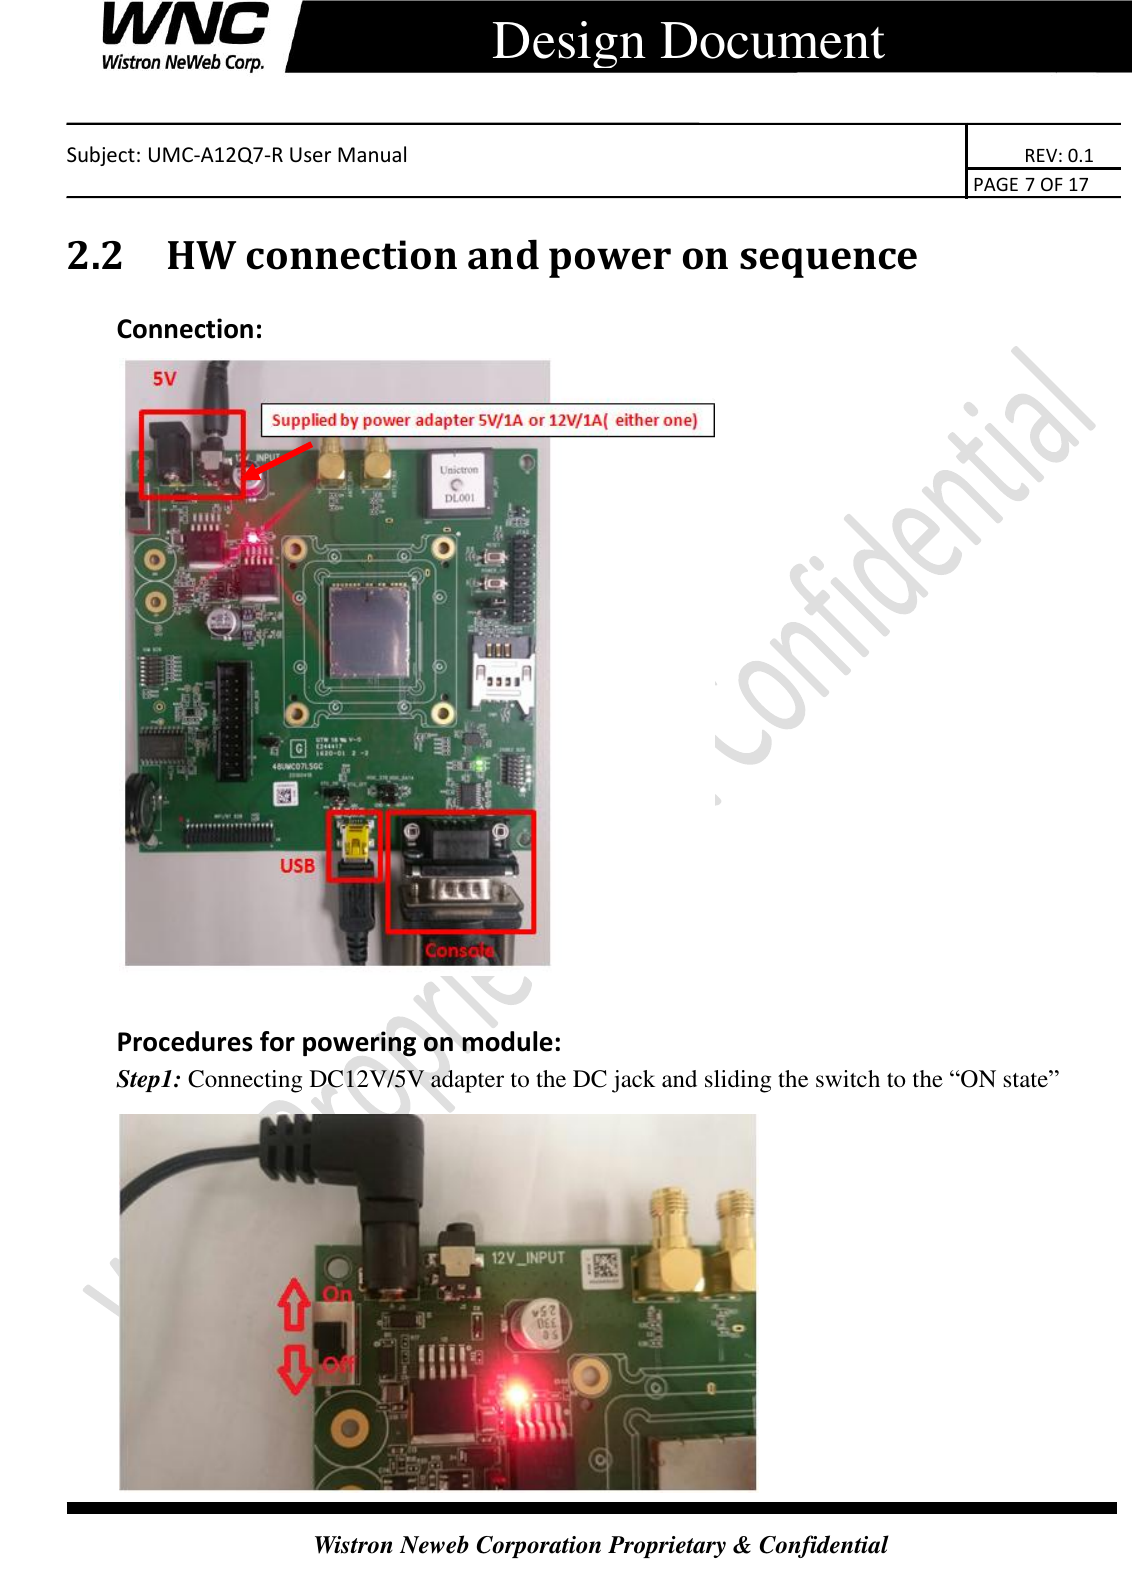    Subject: UMC-A12Q7-R User Manual                                                                      REV: 0.1                                                                                        PAGE 7 OF 17  Wistron Neweb Corporation Proprietary &amp; Confidential      Design Document 2.2 HW connection and power on sequence Connection:   Procedures for powering on module: Step1: Connecting DC12V/5V adapter to the DC jack and sliding the switch to the “ON state”  